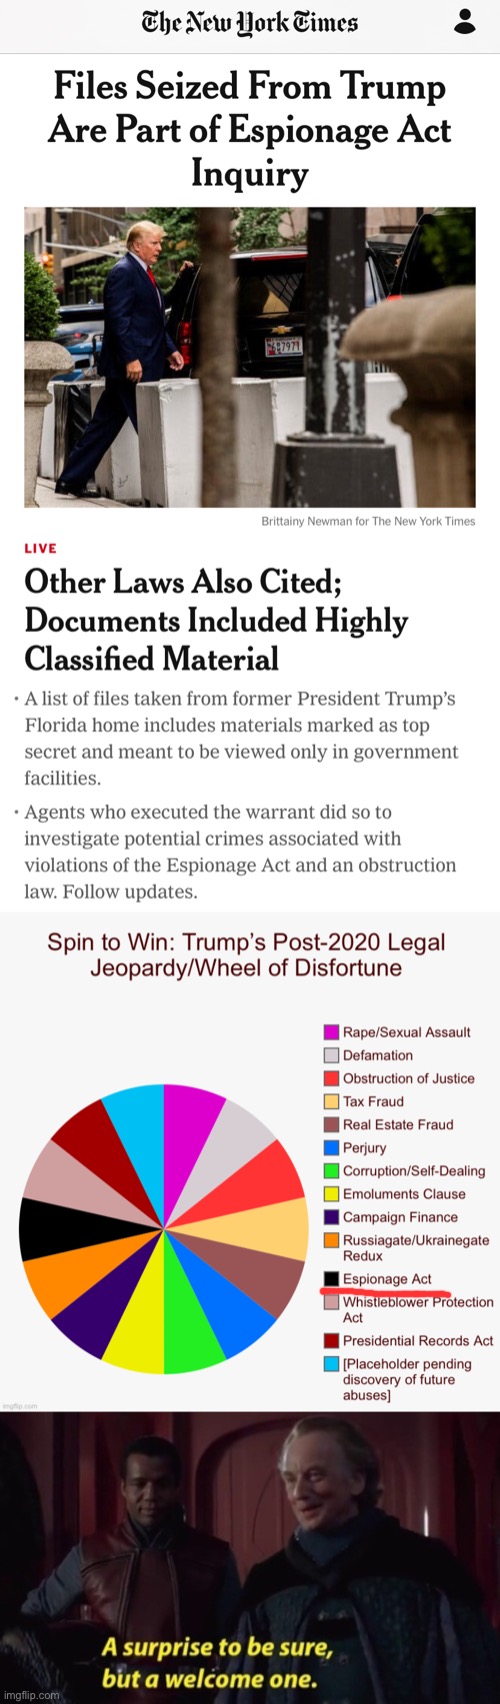 image tagged in trump espionage act,spin to win trump s post-2020 legal jeopardy,a surprise to be sure | made w/ Imgflip meme maker